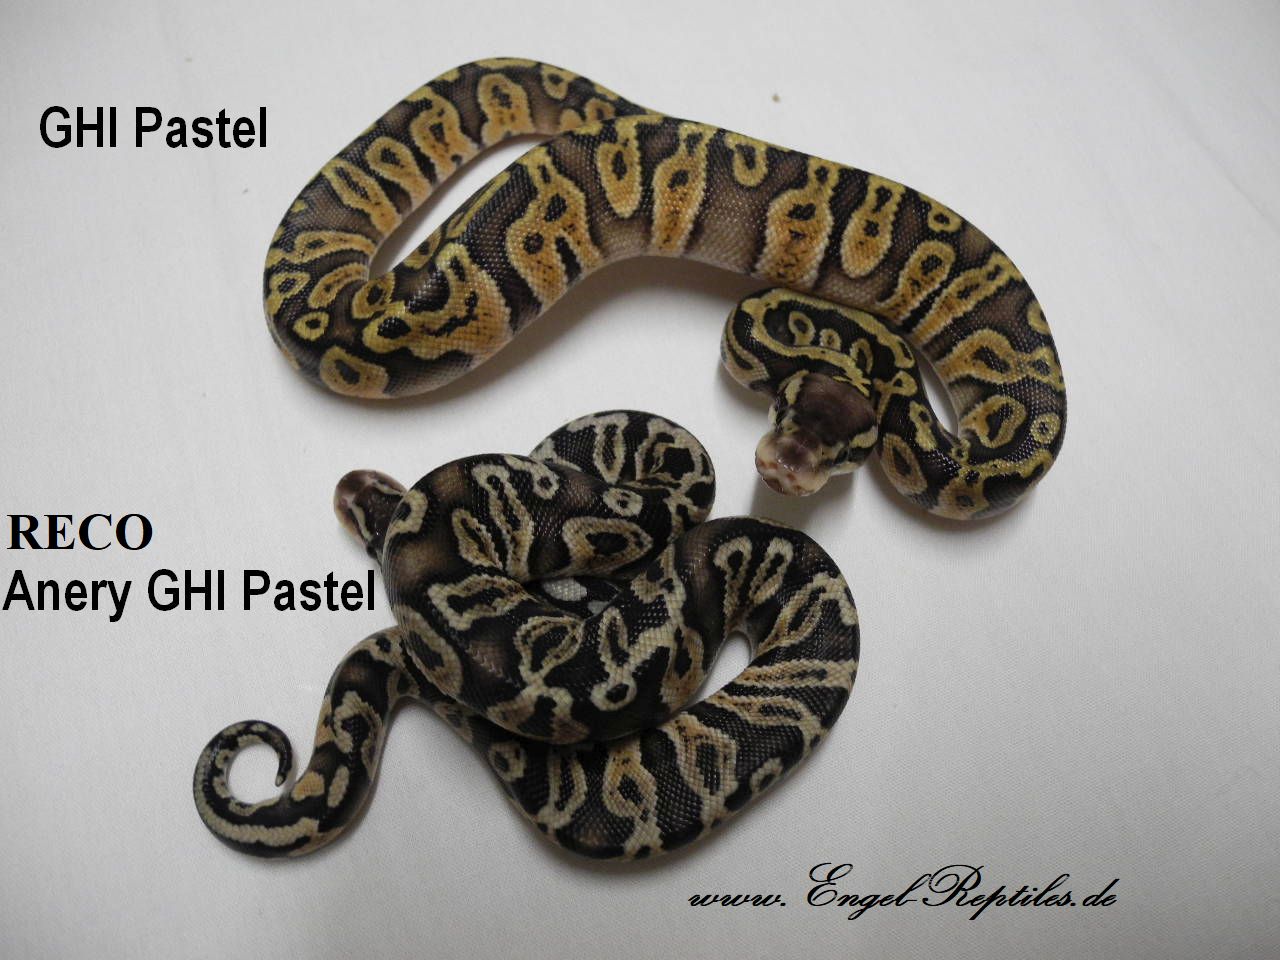 RECO Anery GHI Pastel by Engel Reptiles